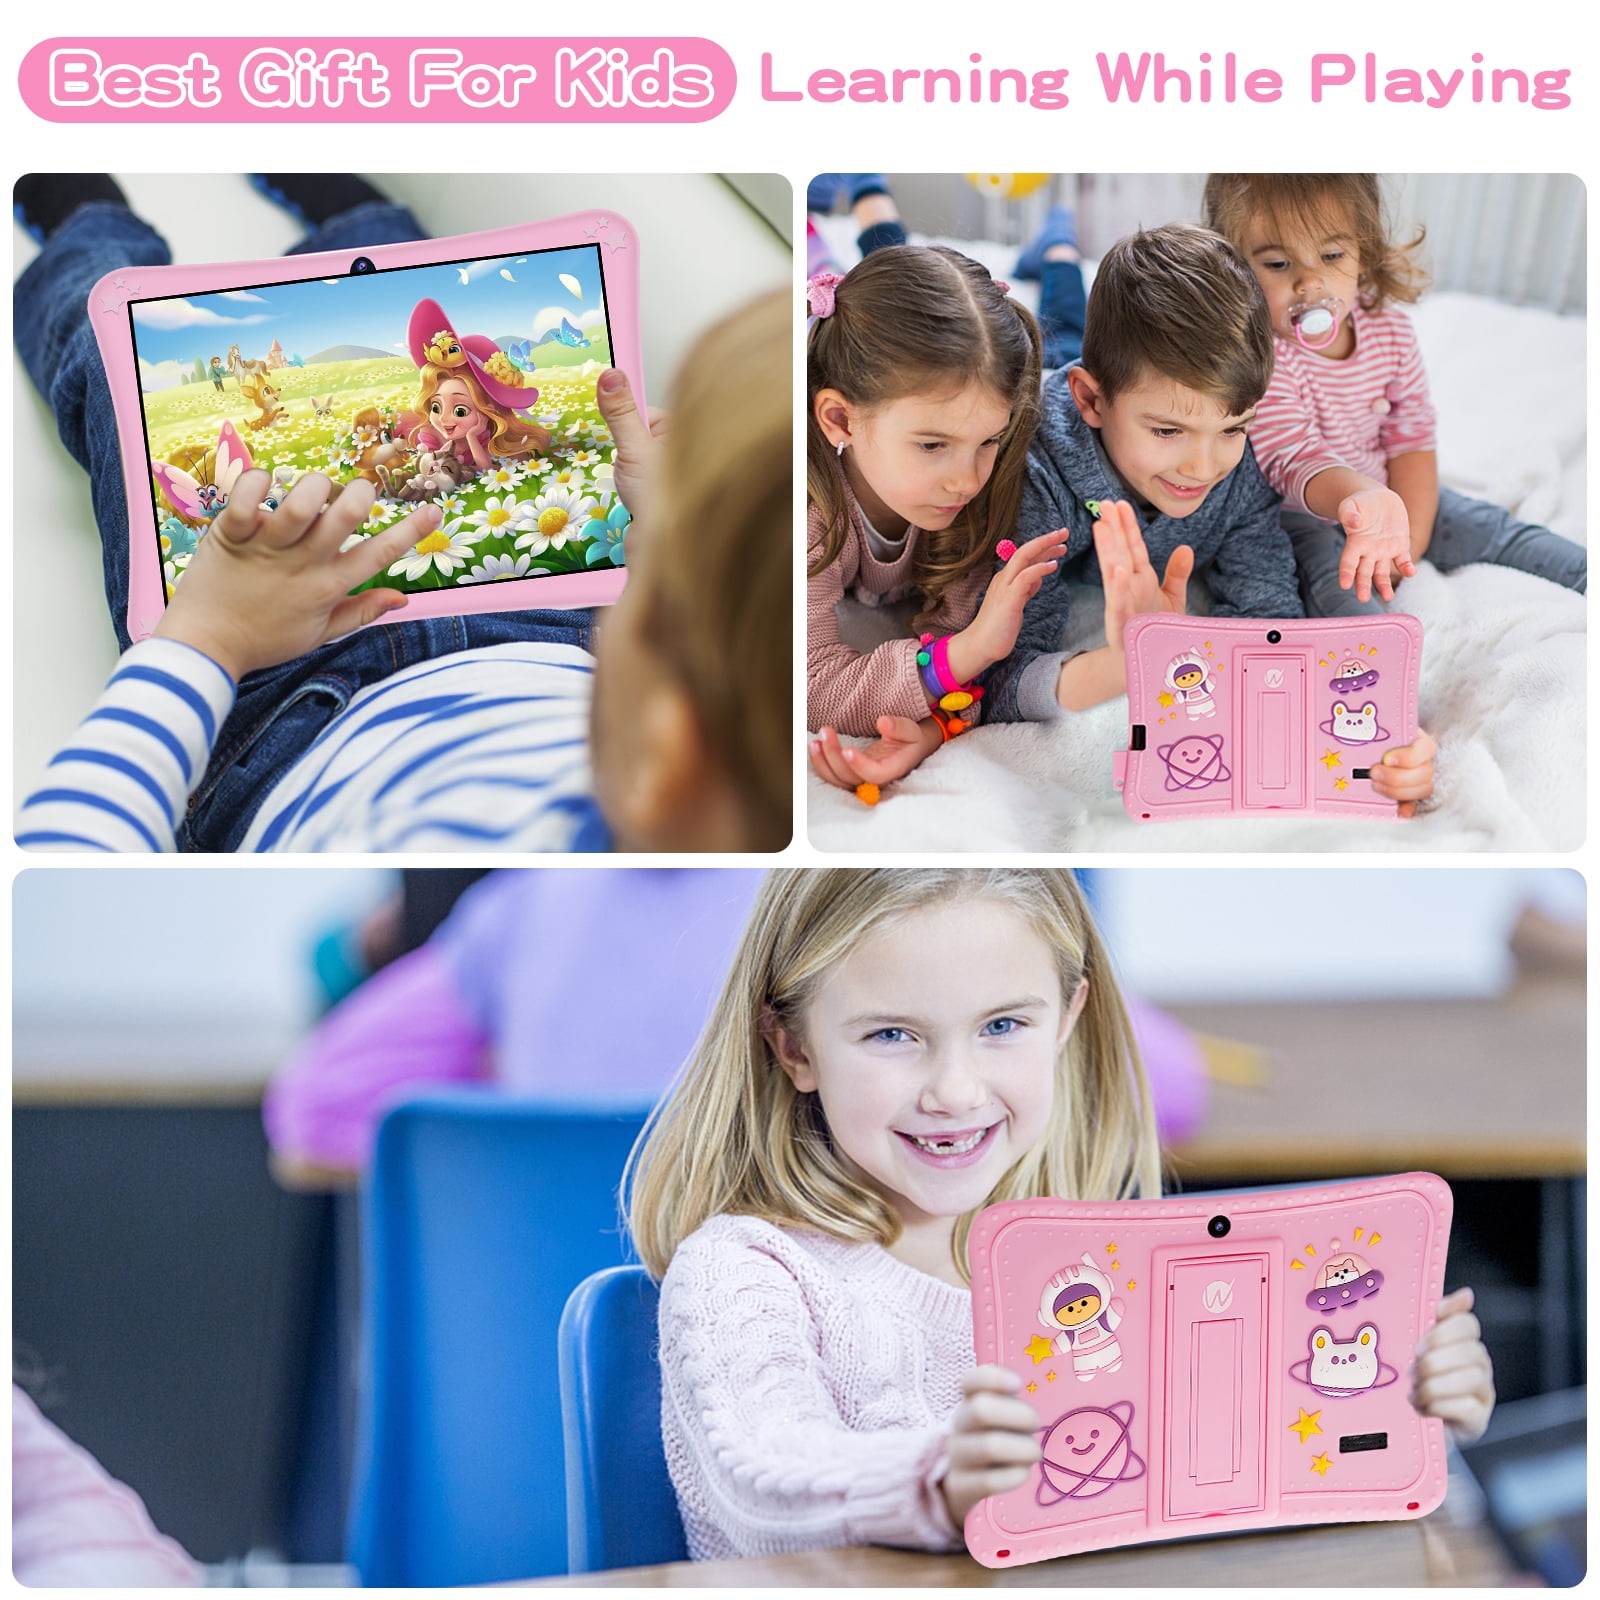 Educational Games at Poki and Win a Fire 7 Tablet - In The Playroom